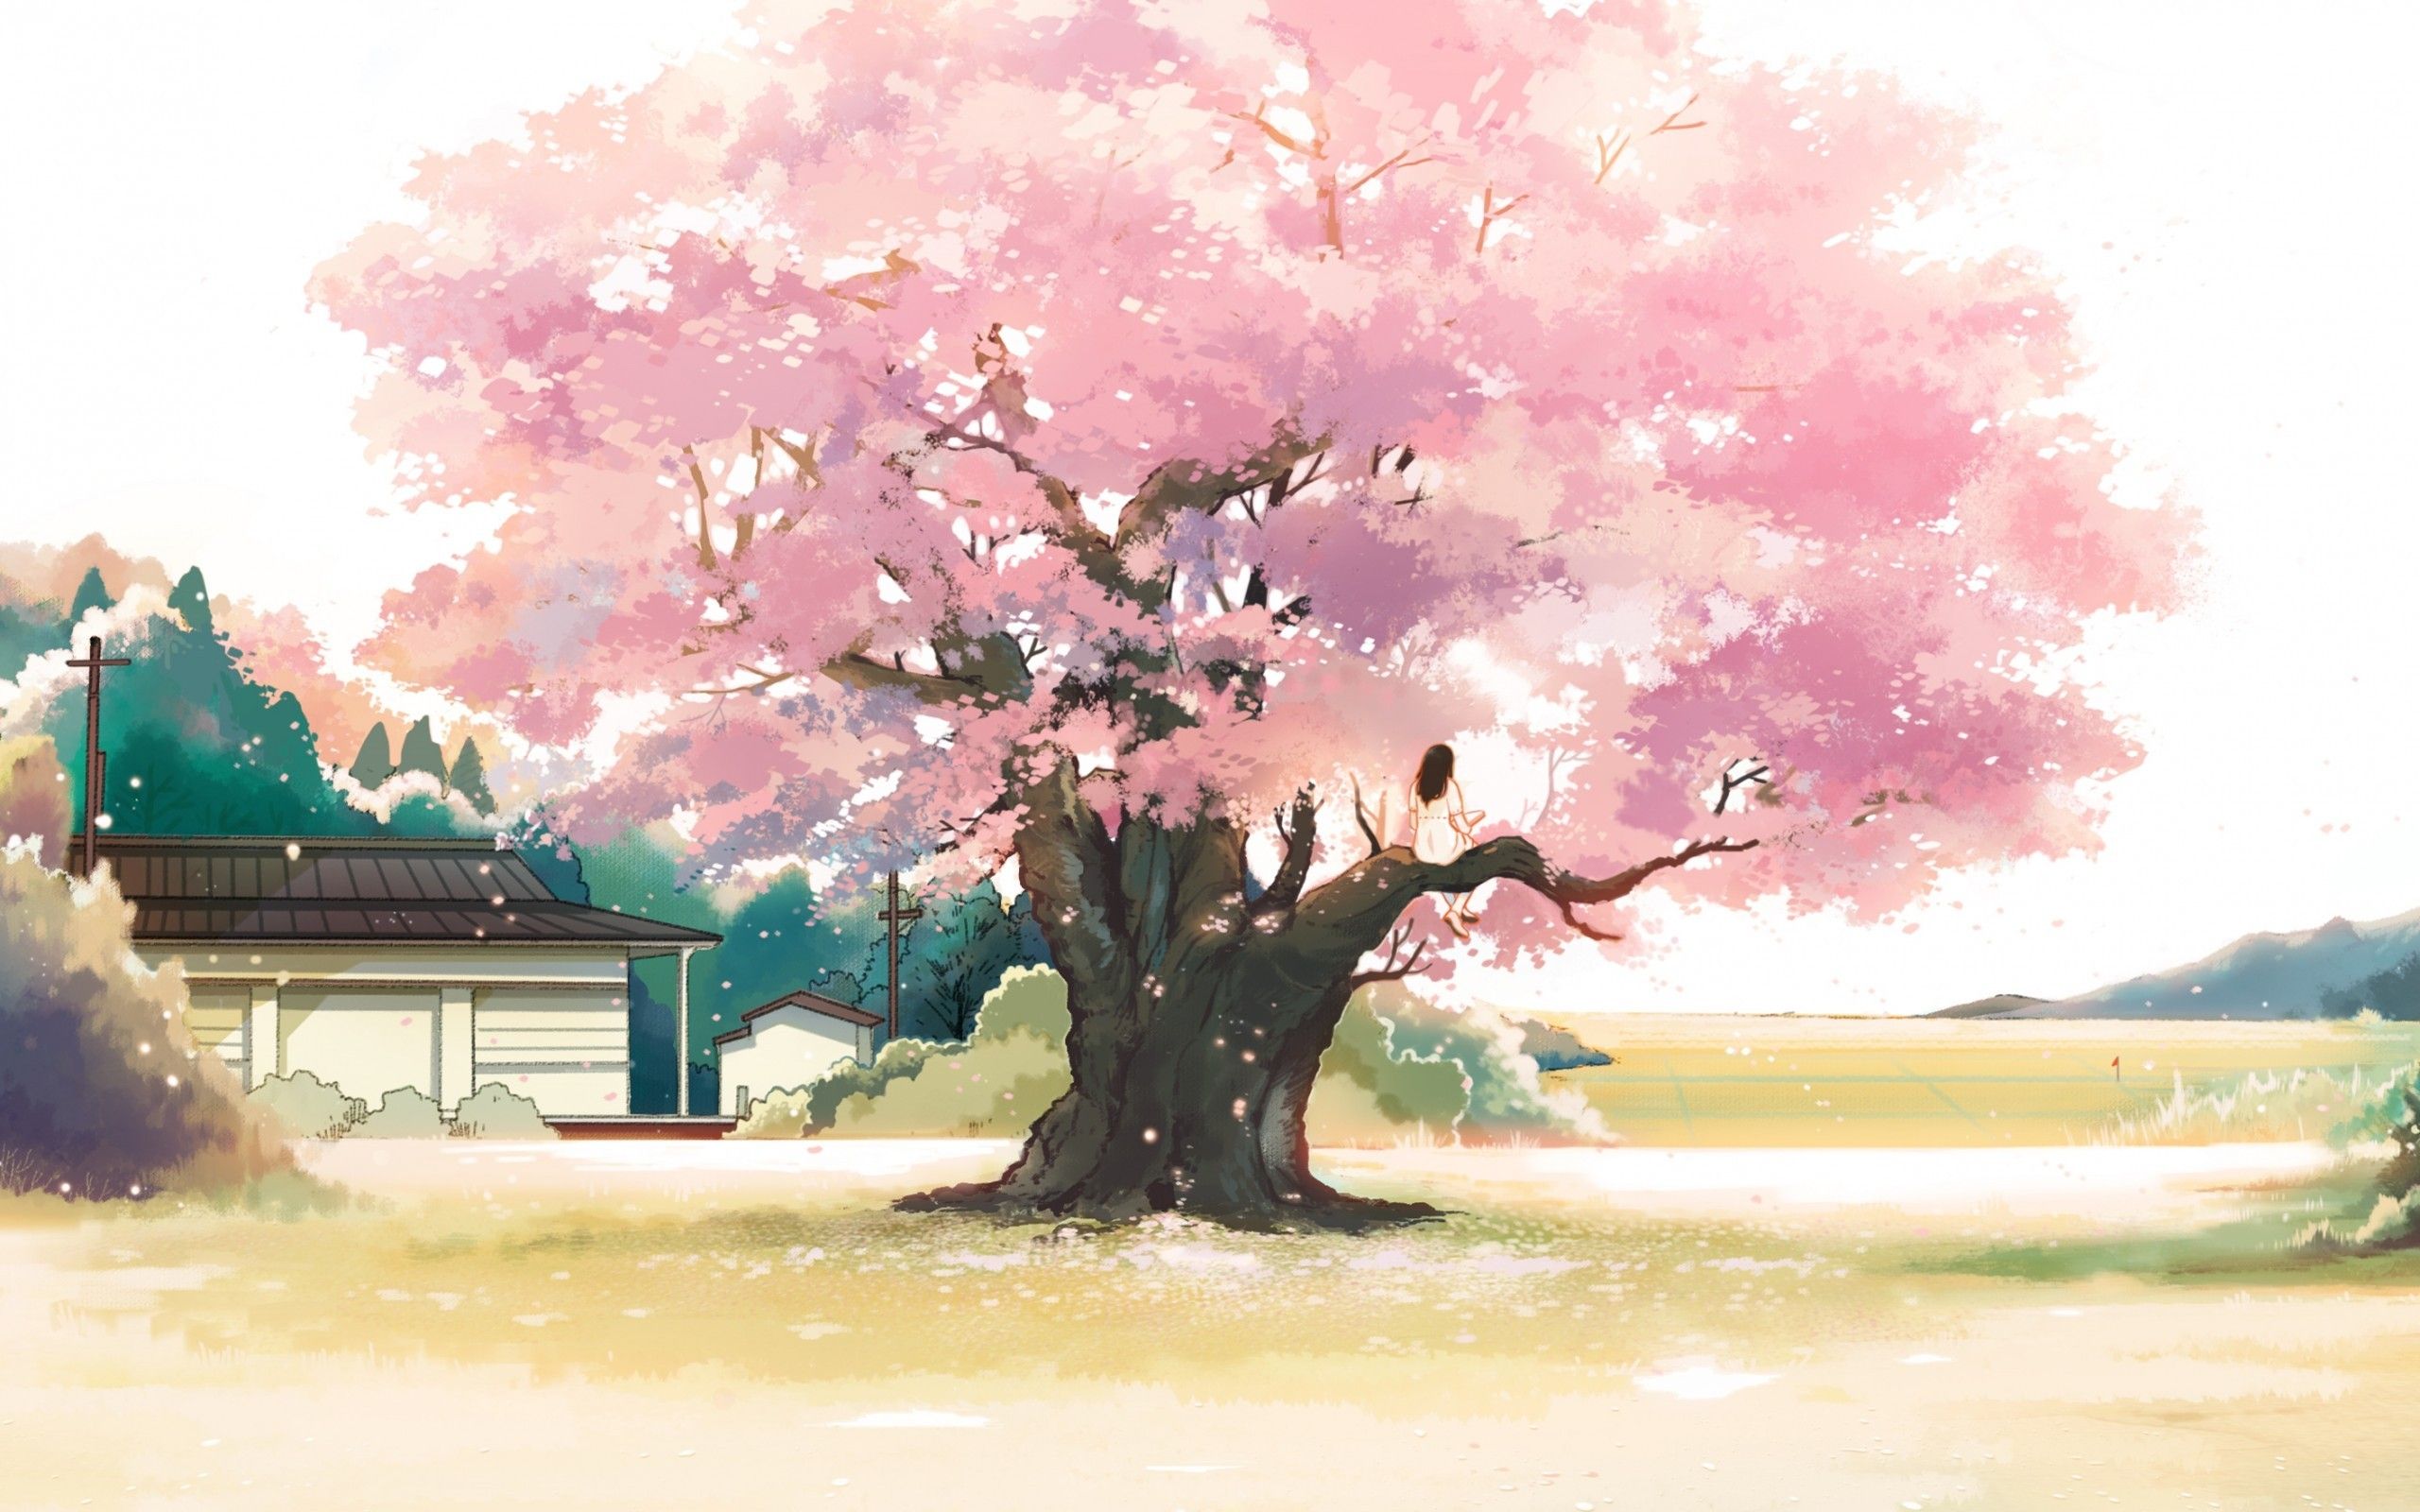 Download 2560x1600 Anime Landscape, Girl, Cherry Blossom, Pink Leaves, Tree, Scenic Wallpaper for MacBook Pro 13 inch